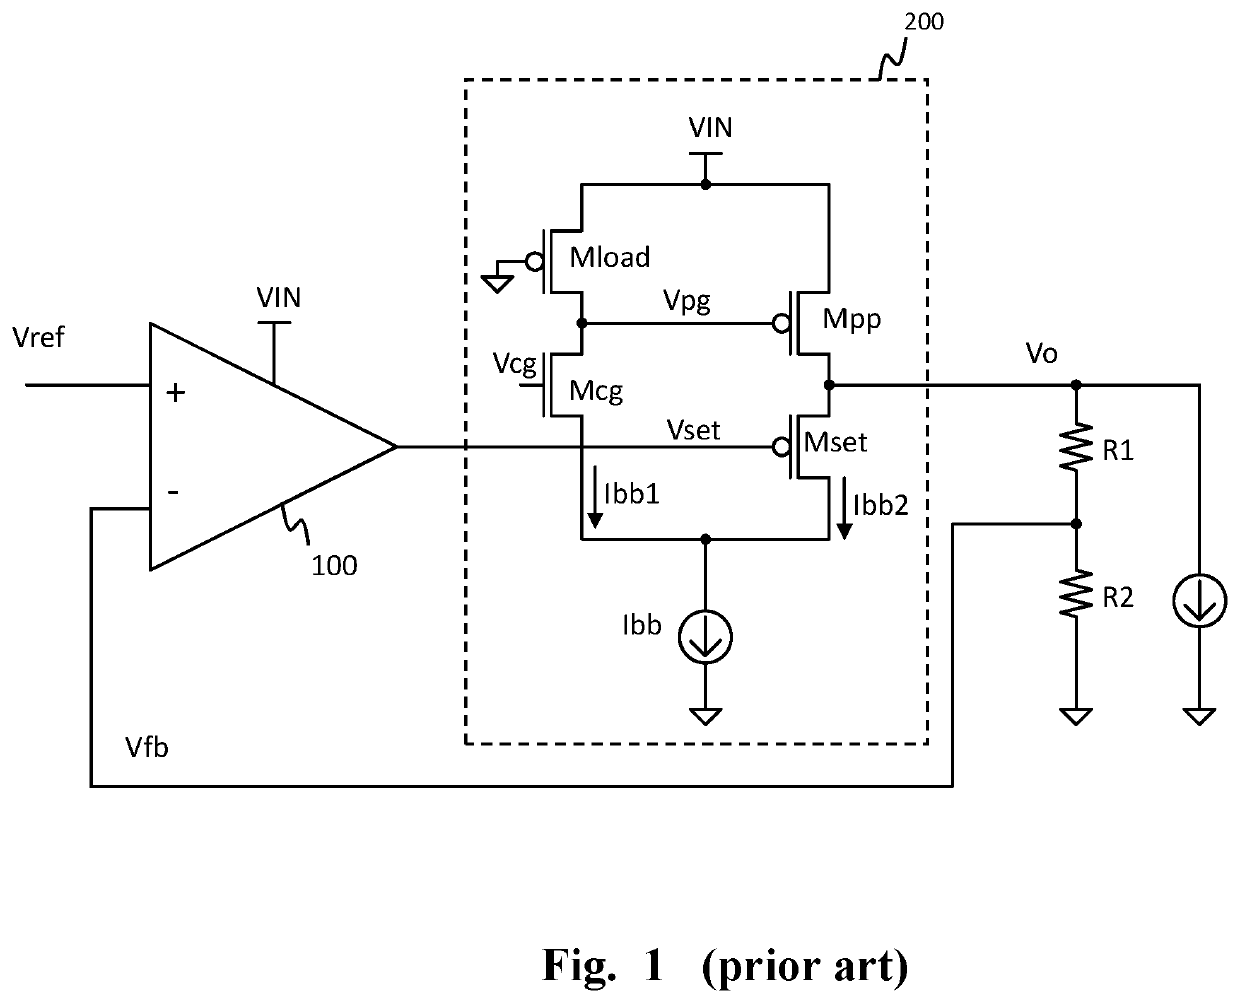 Fast response linear regulator with bias current control and overshoot and undershoot suppression